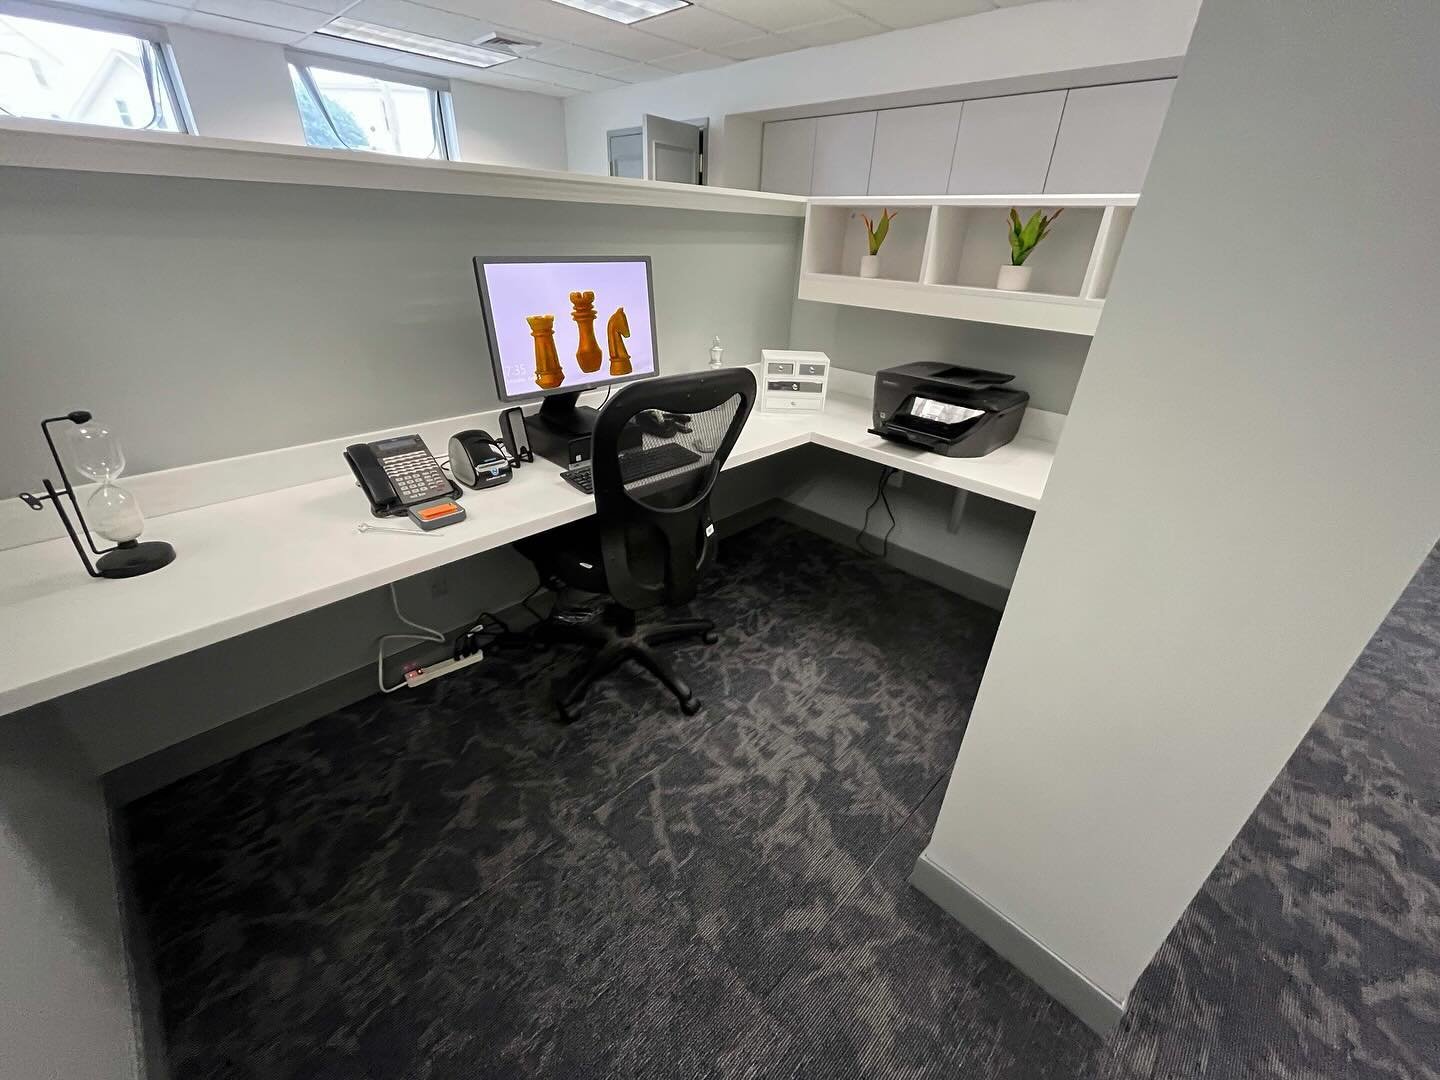 #15of40: Coletta completed the new office space for the West Warwick Housing Authority. With custom cabinets, shelving, and Quartzite countertops throughout to complete this beautiful space. &lsquo;Attention to Detail&rsquo;
*
*
#WeAreColetta #Constr